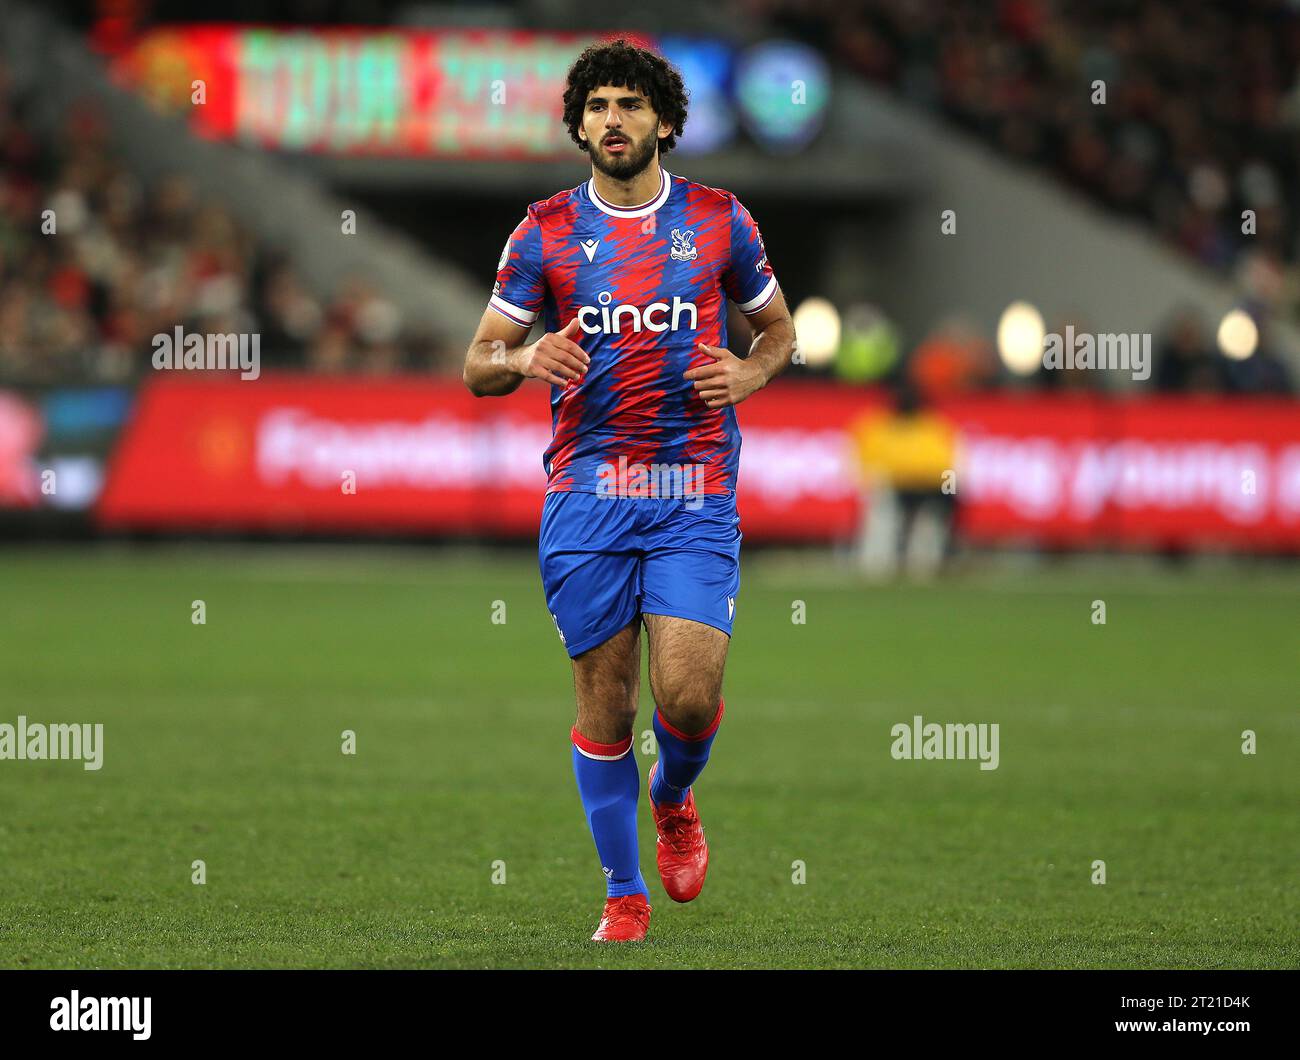 Cardo Siddik of Crystal Palace during the match between Crystal Palace v Manchester United at the MCG on 19th July 2022. - Manchester United v Melbourne Victory, MCG Stadium, Melbourne. - 19th July 2022. Editorial Use Only Stock Photo